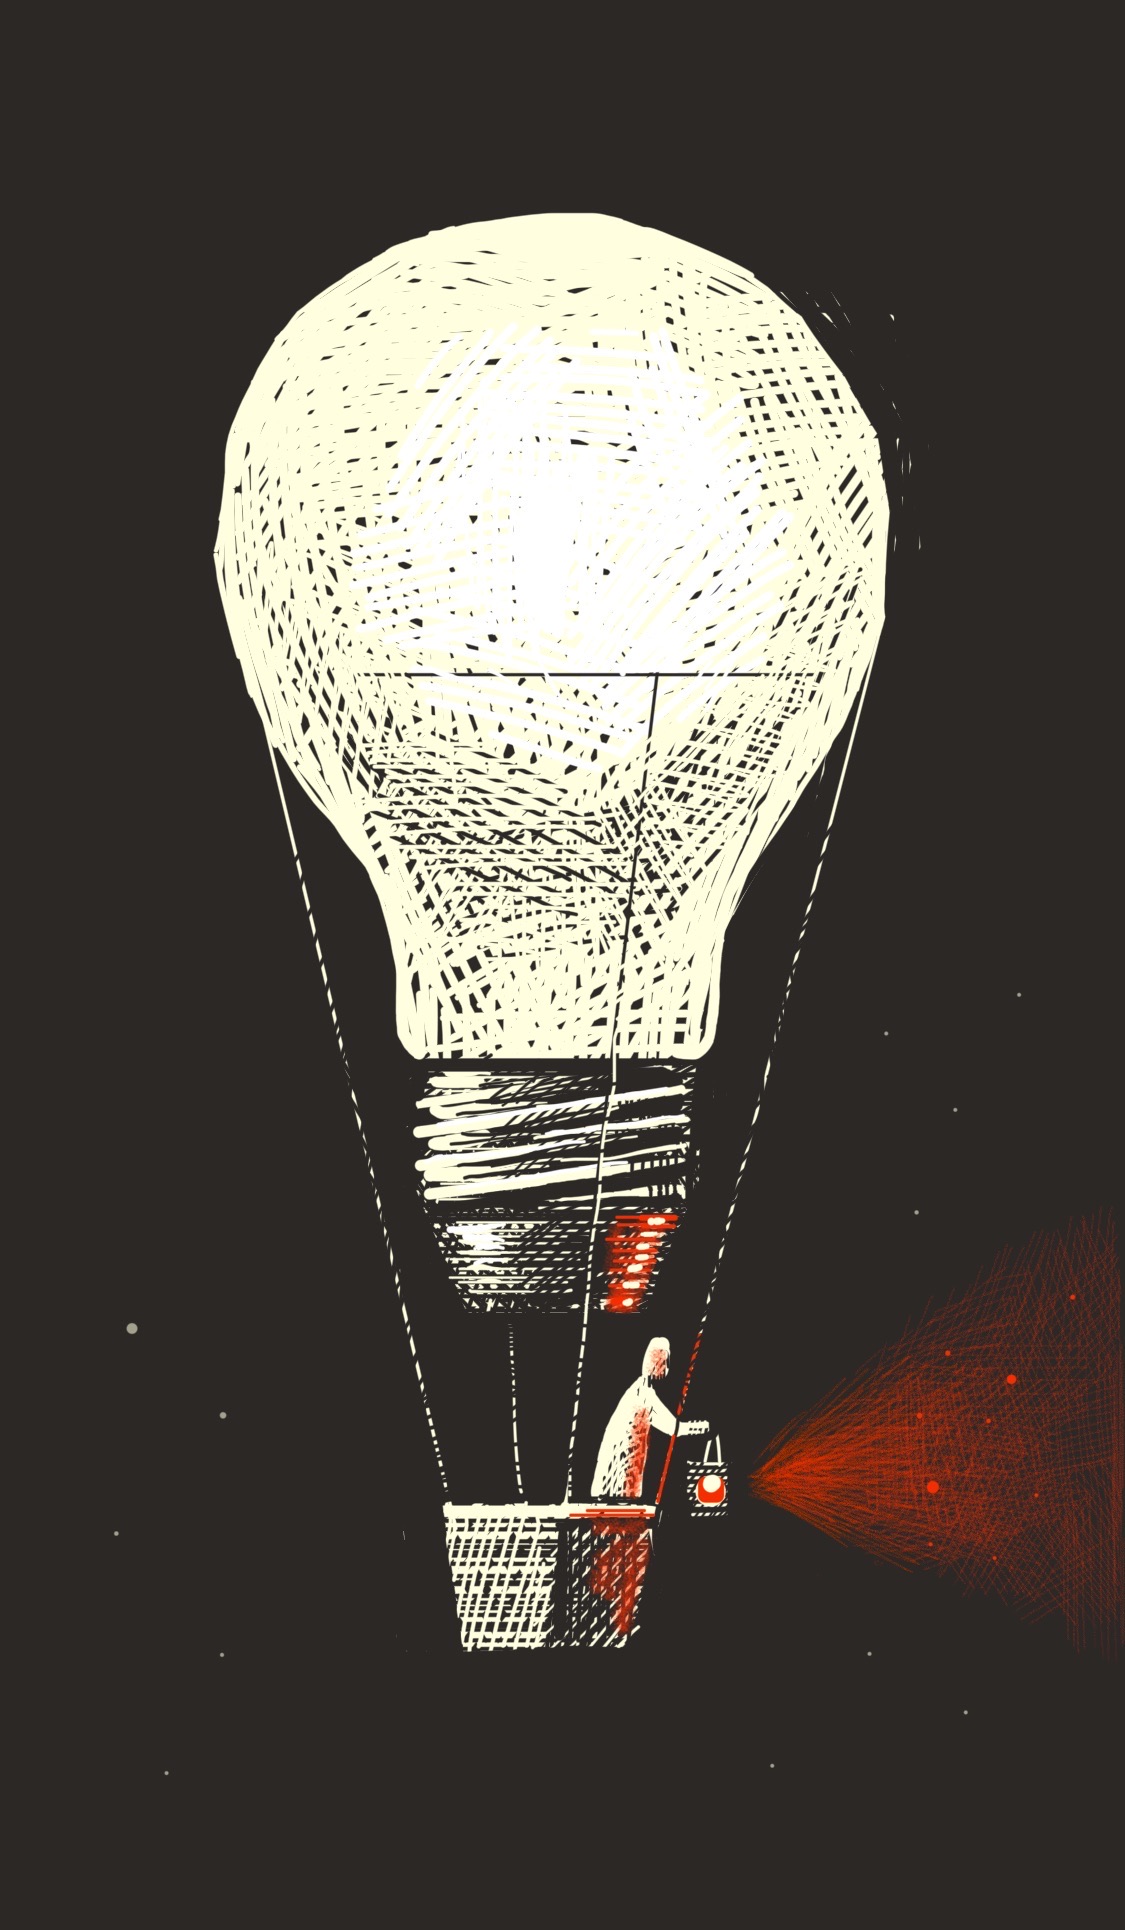 A person in a hot-air balloon that's a lightbulb. The person is shining a red lantern into the darkness.